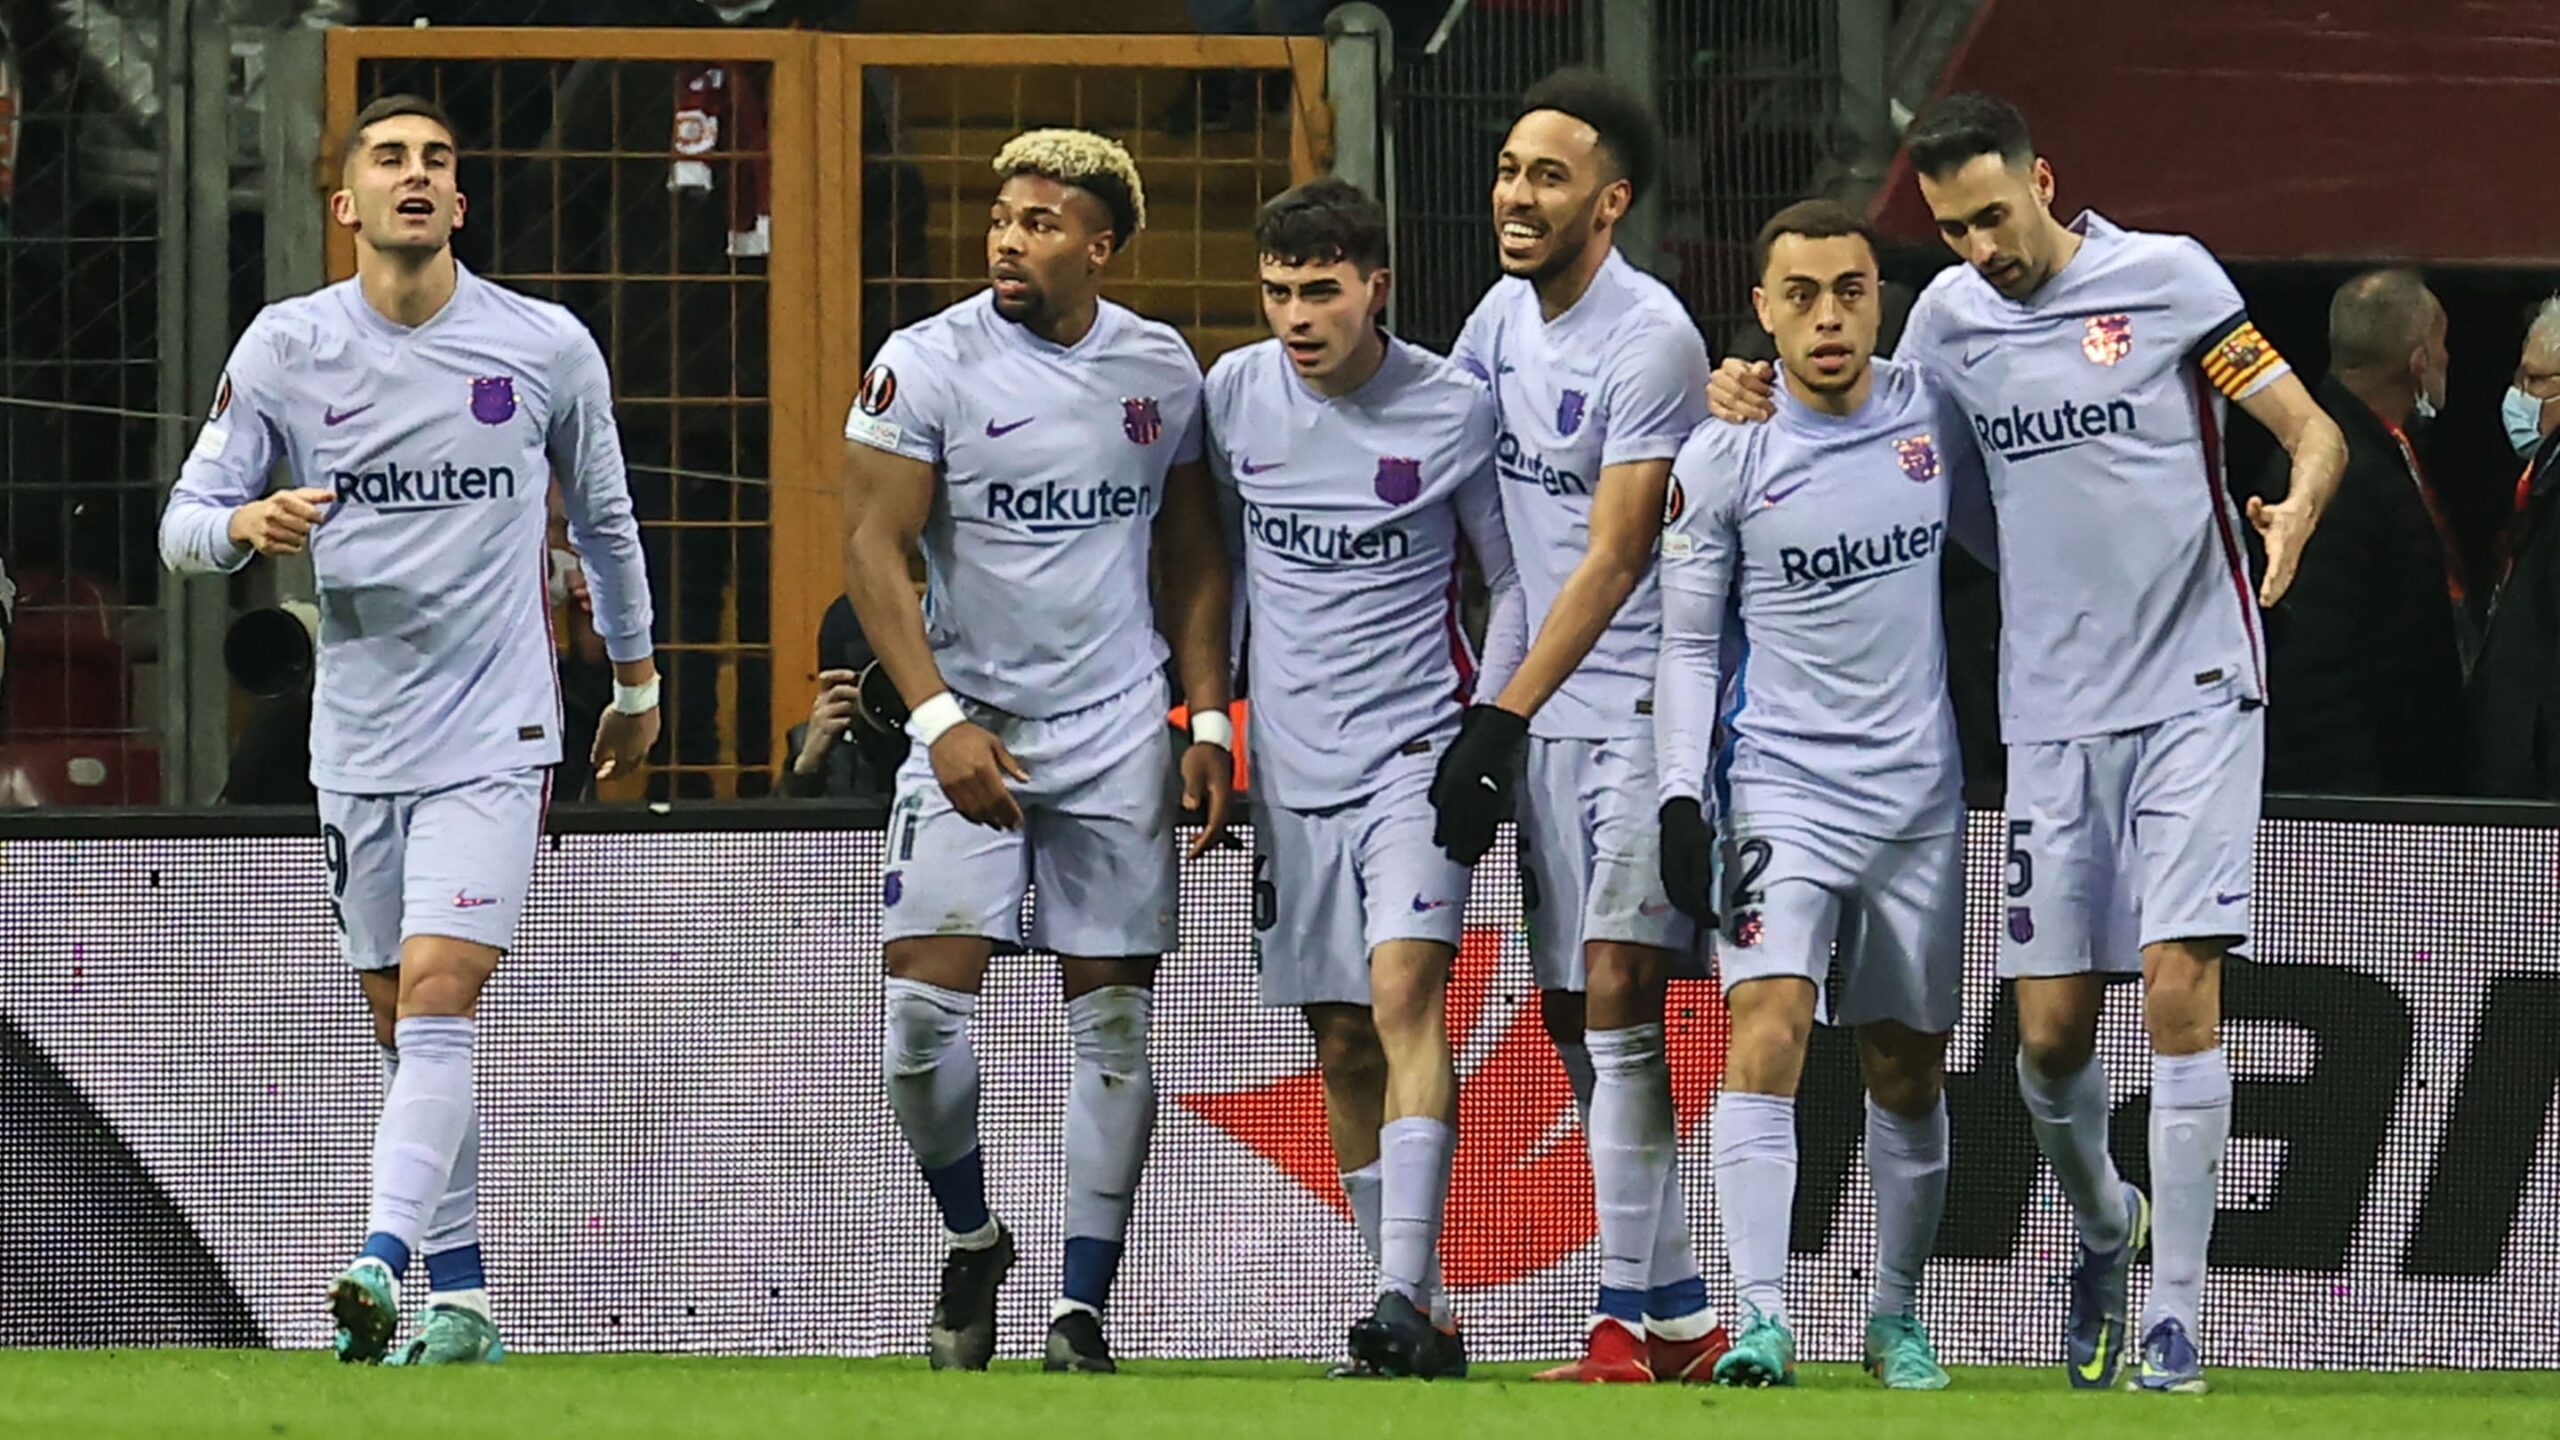 Eintracht Frankfurt vs Barcelona Live: Barca looking to edge past Frankfurt for a place in the Europa League semi-finals; Latest Team News, Injuries and Suspensions, Predicted Lineups, Live Streaming